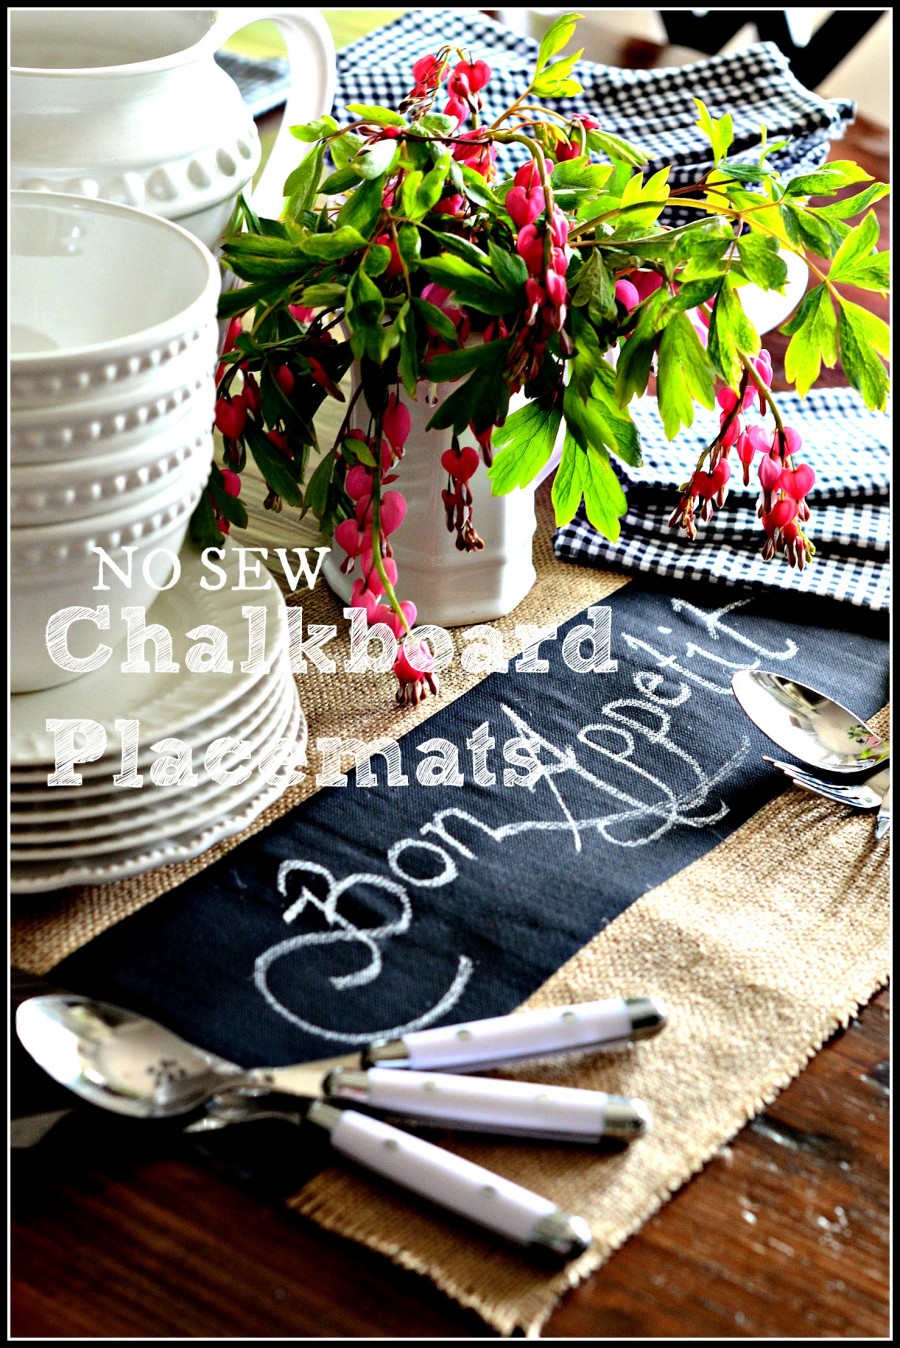 NO SEW CHALKBOARD PLACEMATS